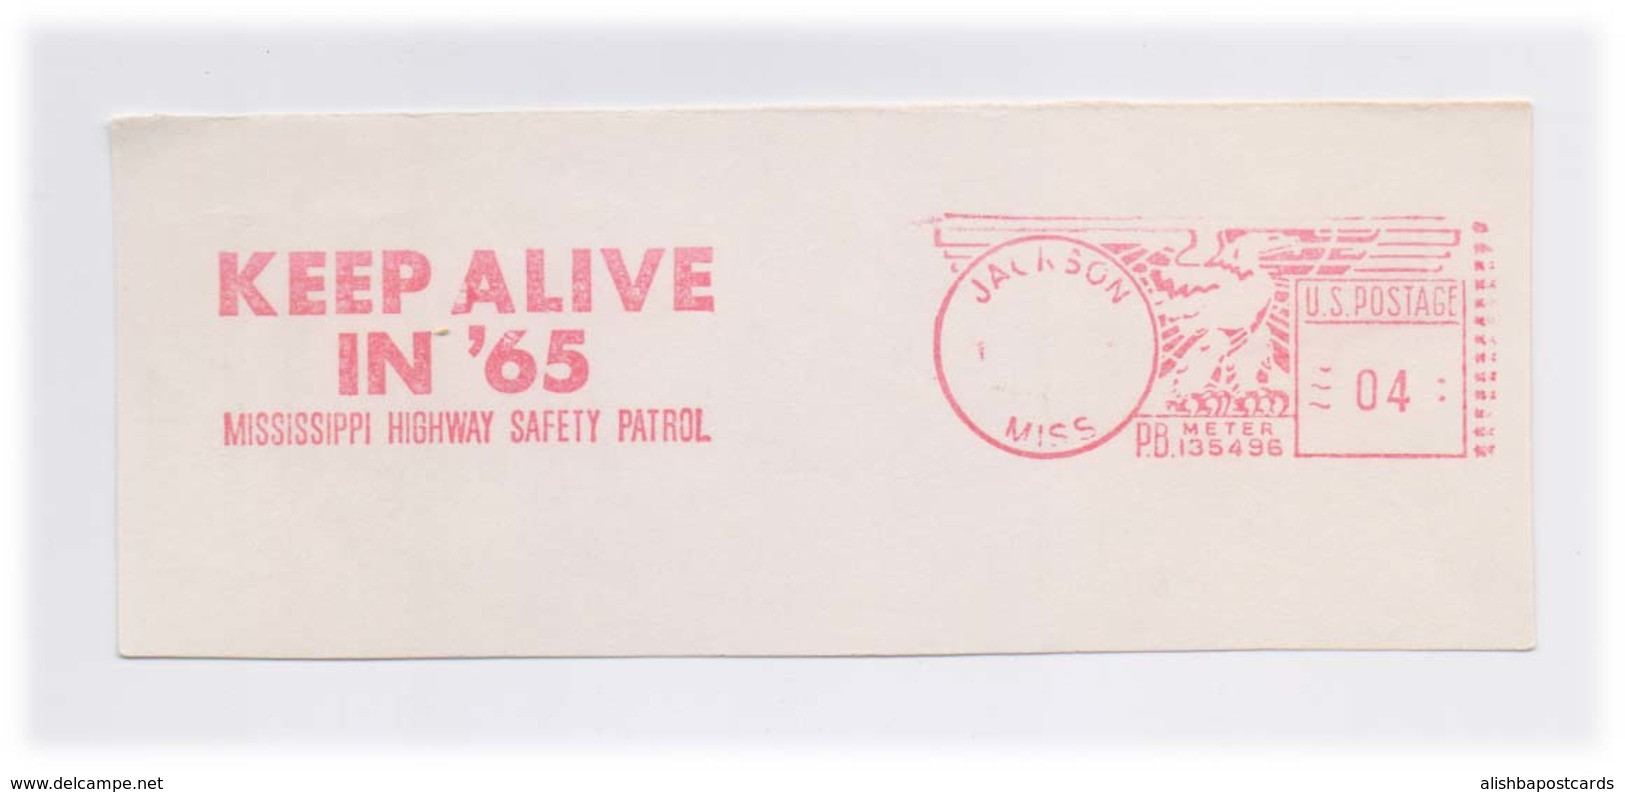 EMA Meter Frank Front Cover Cut Red Meter Mark Keep Alive In 65 Mississippi Highway Safety Patrol Slogan US POSTAGE - Incidenti E Sicurezza Stradale